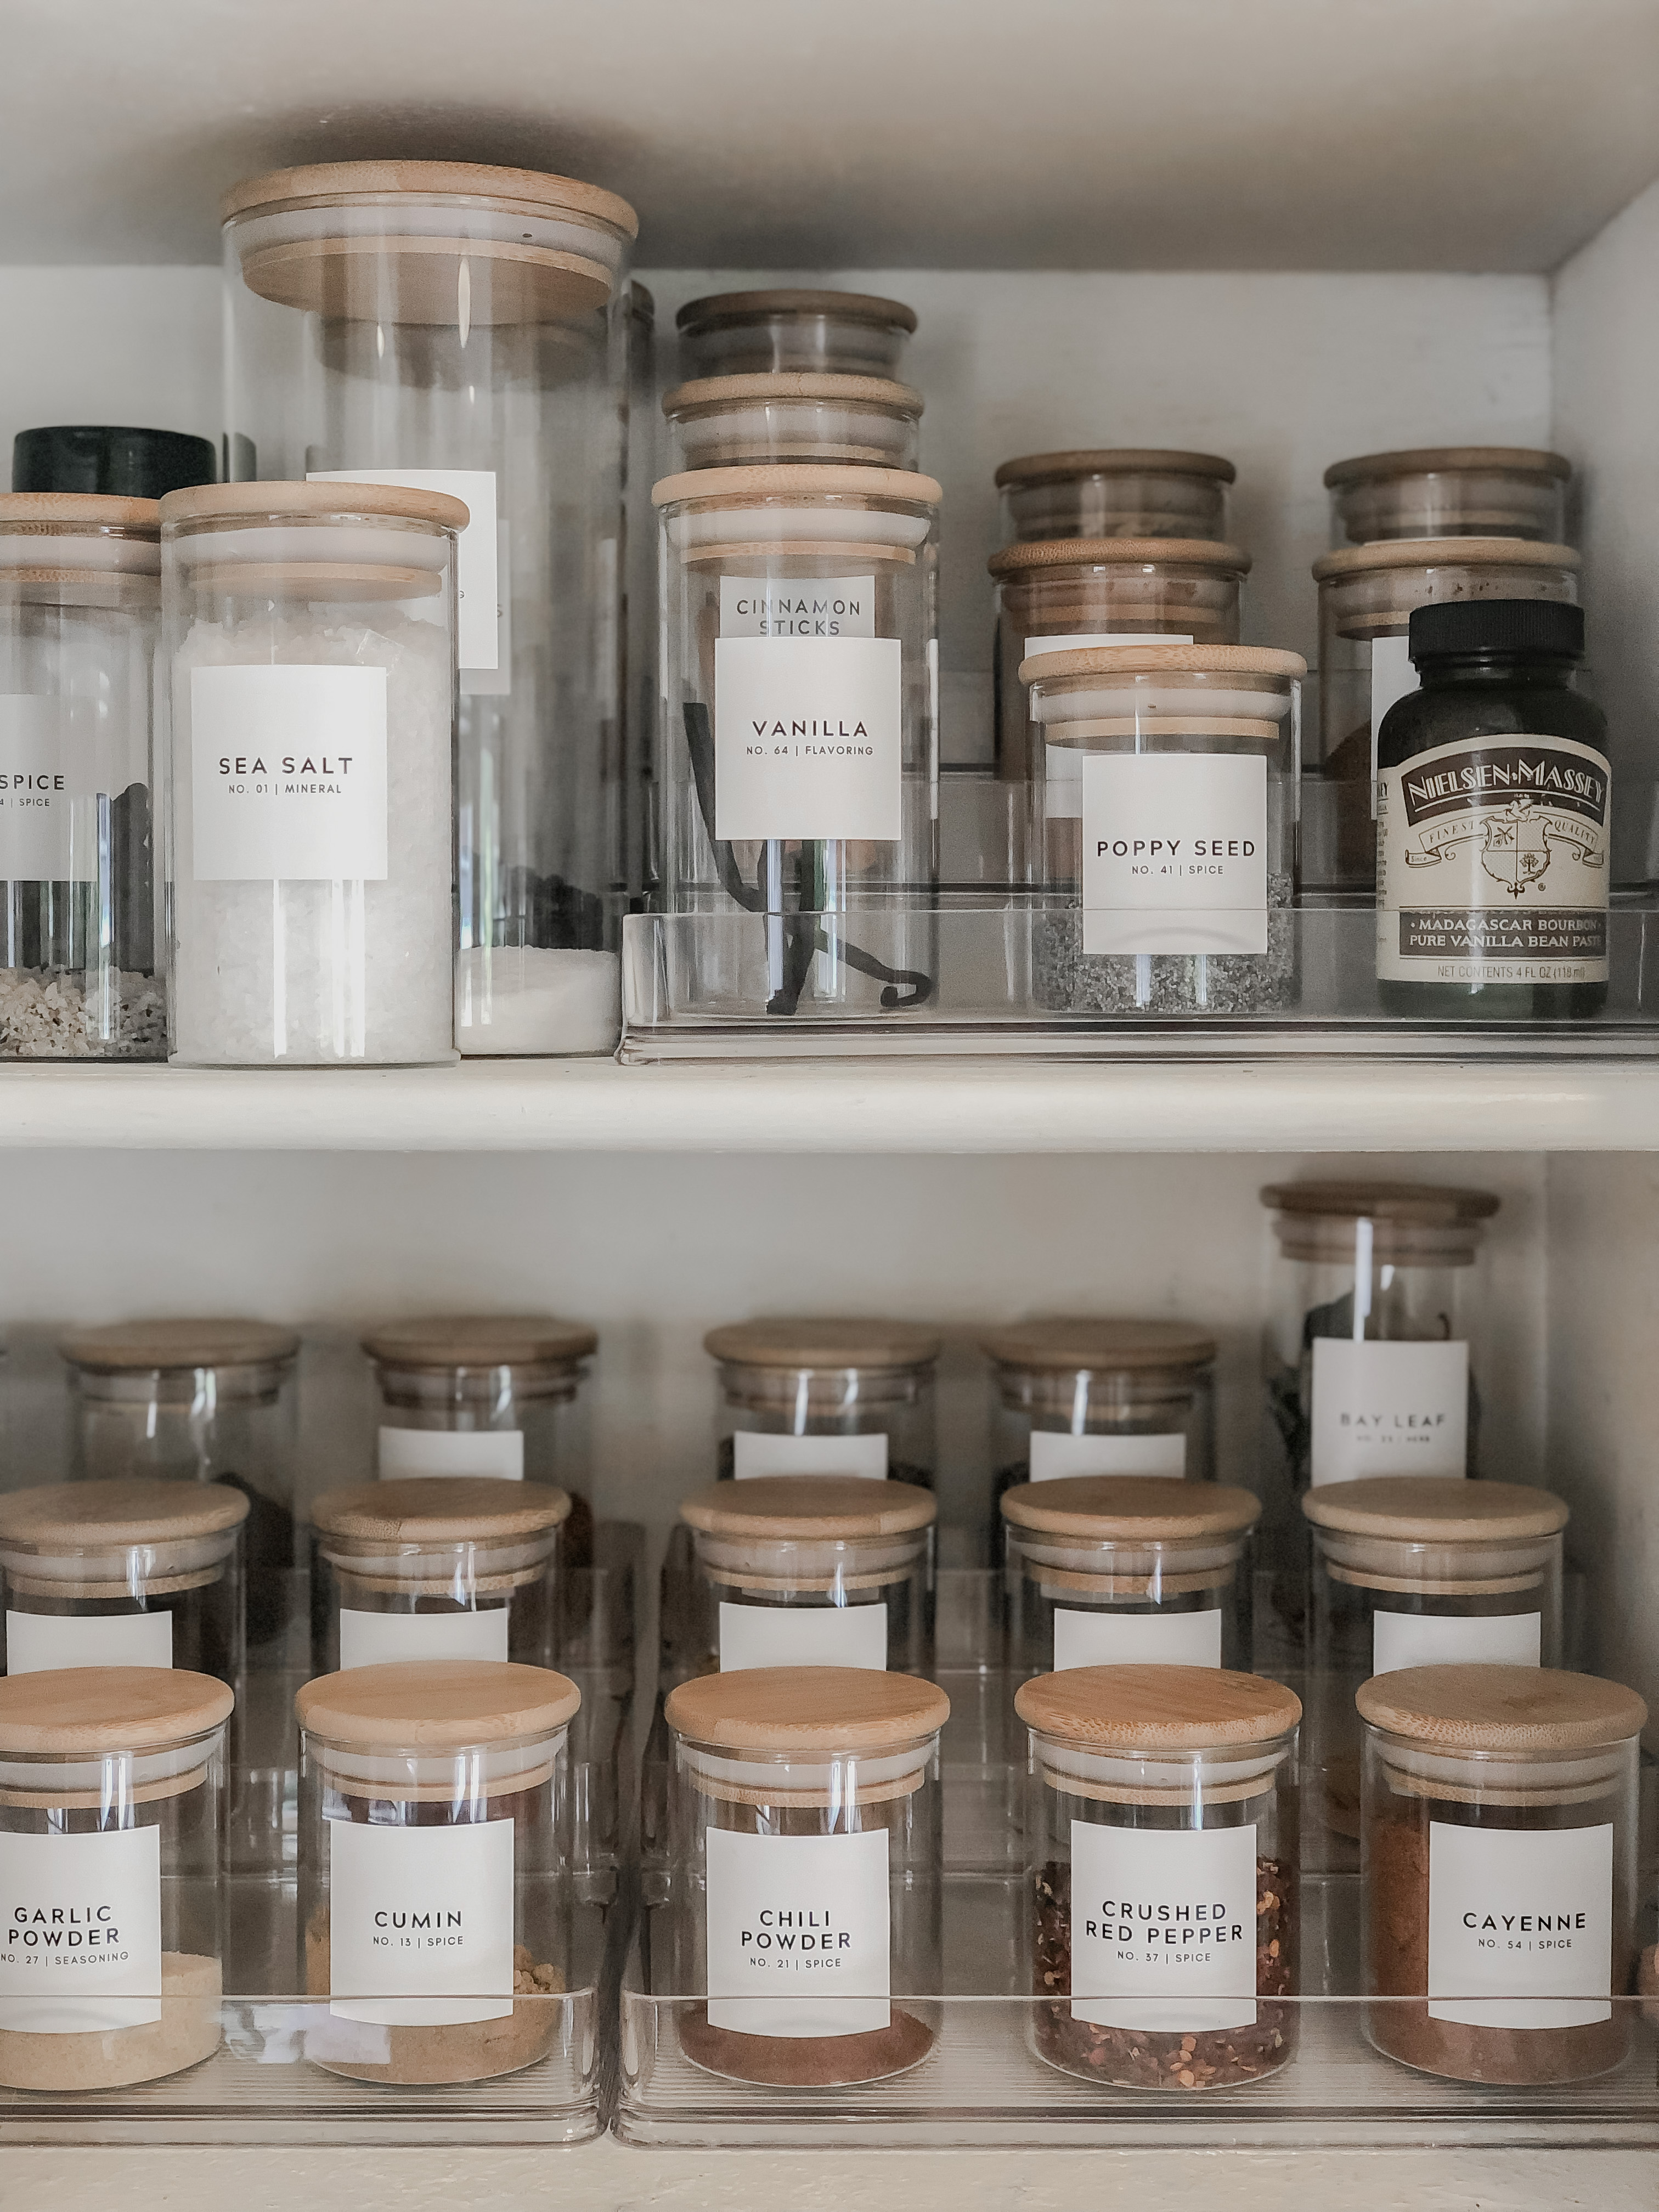 organized spices